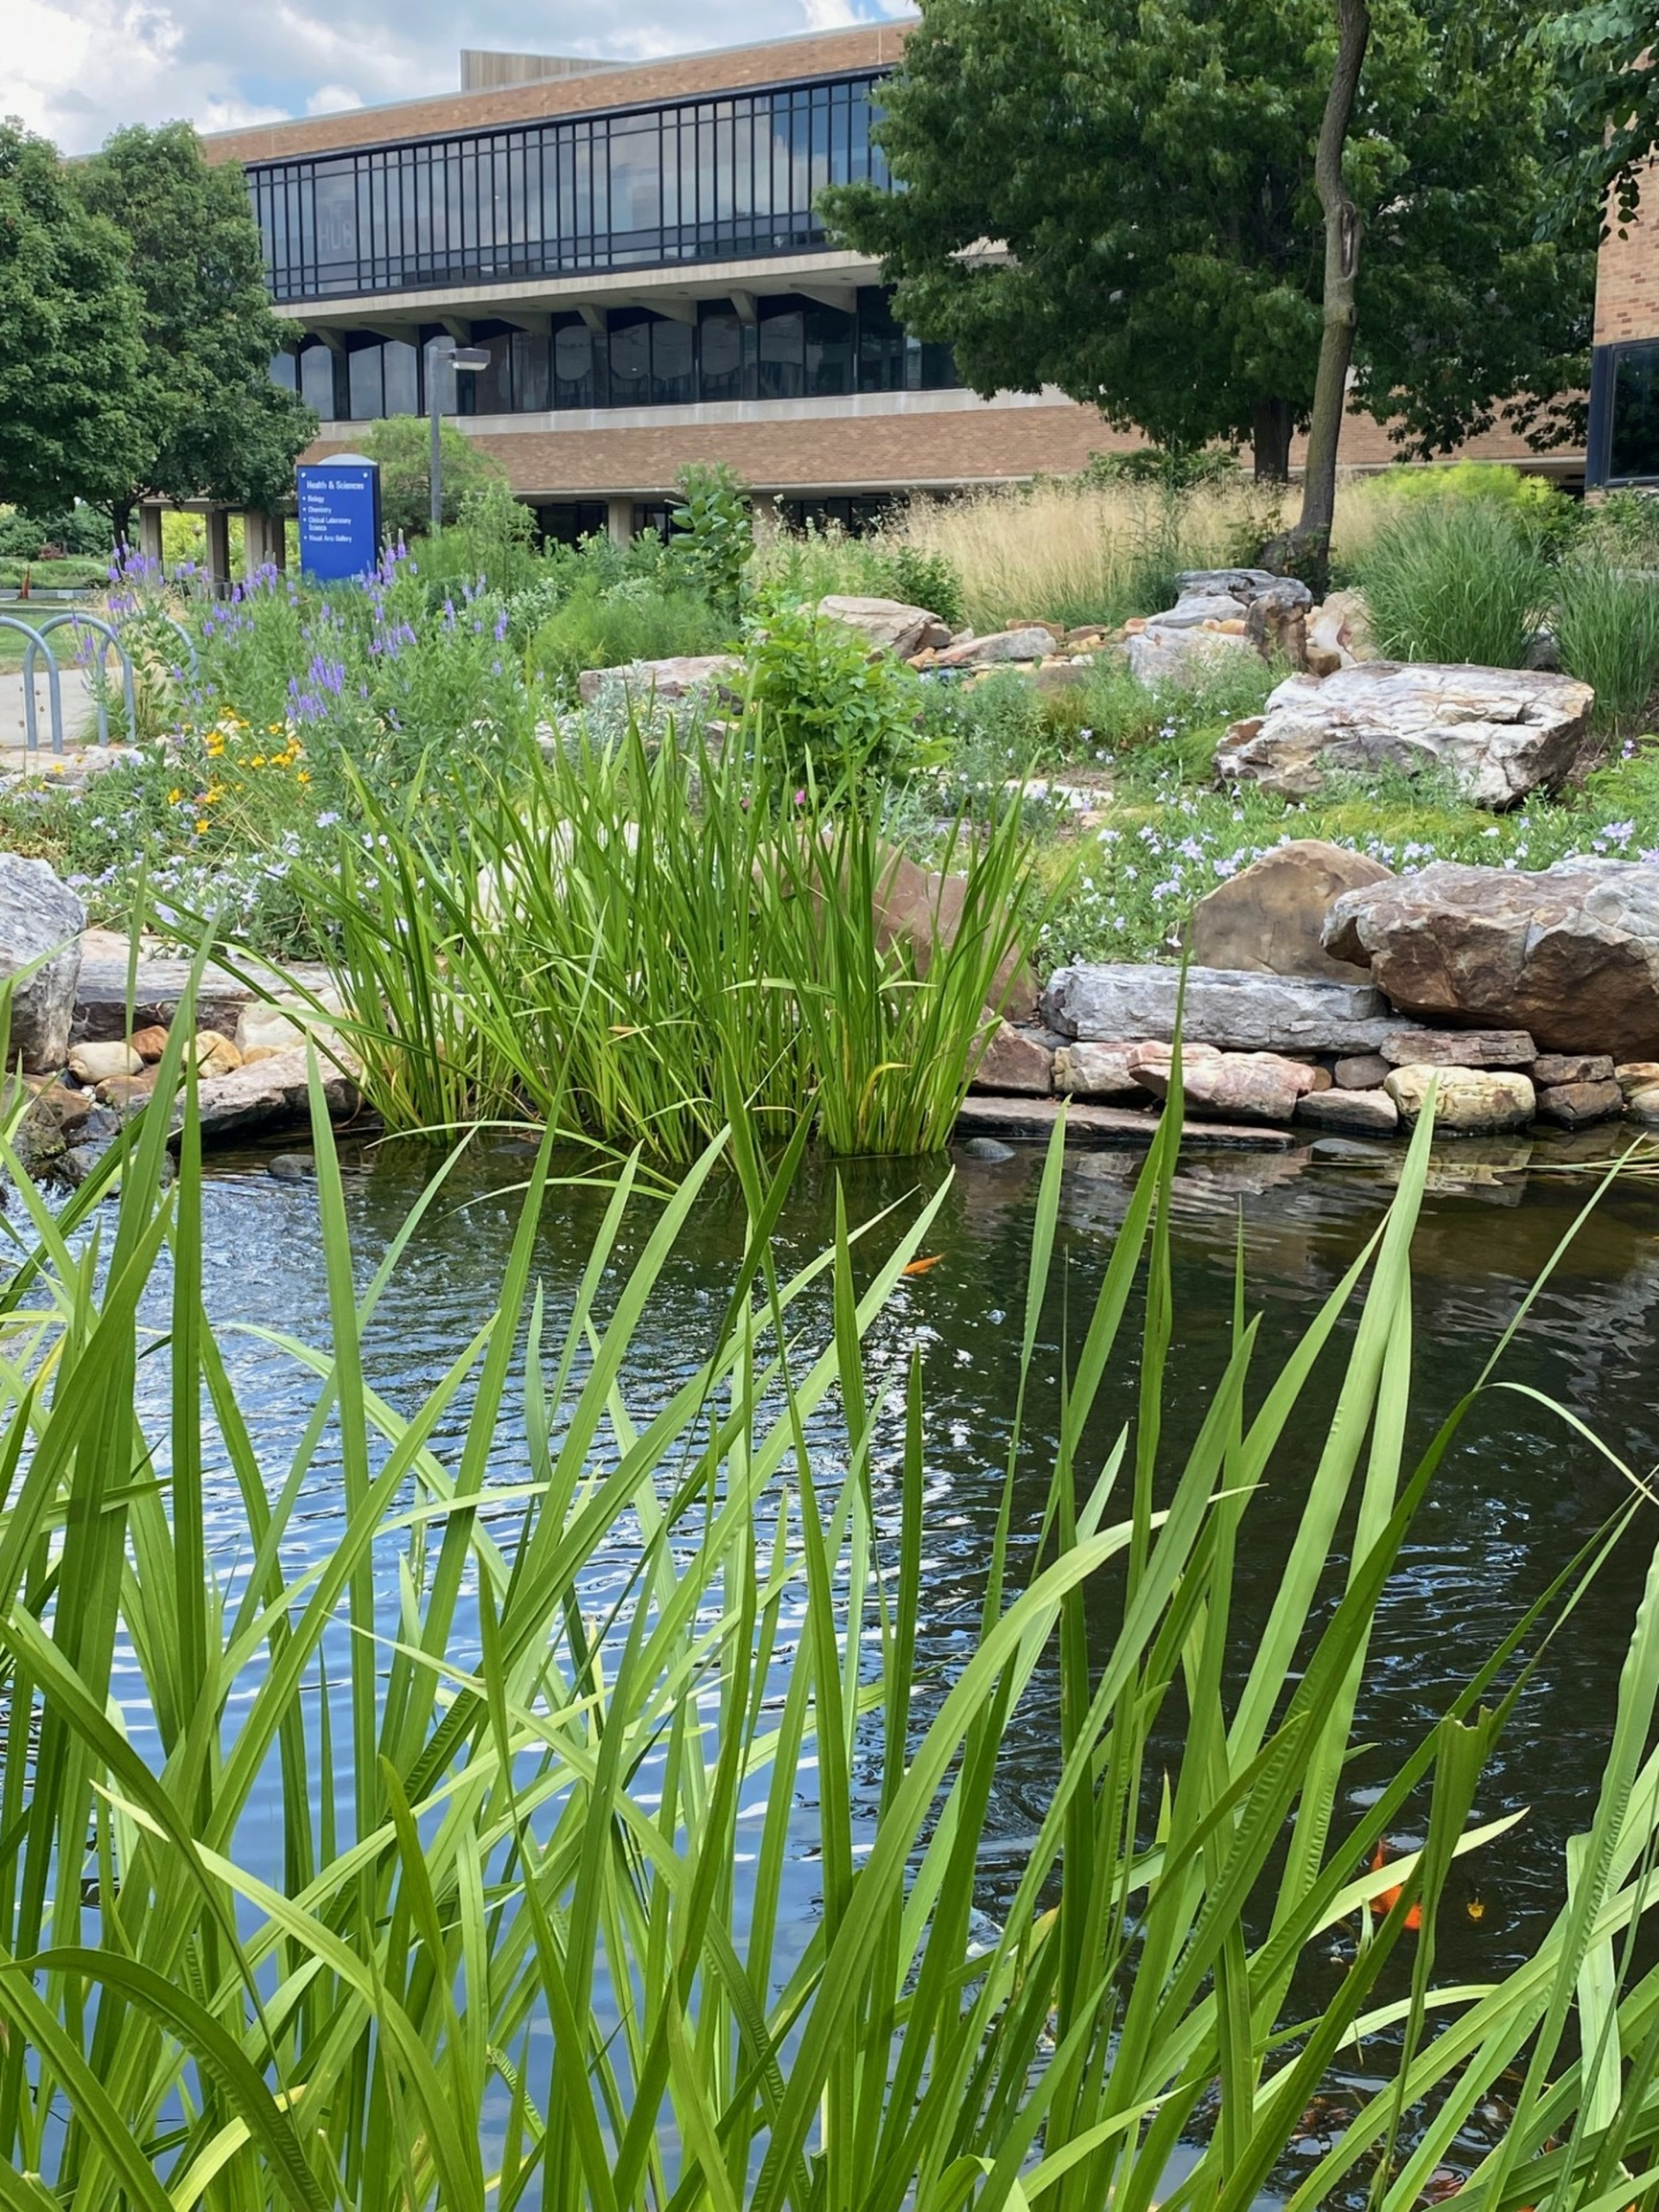 The koi pond and surrounding wildflowers with Brookens Library in the background